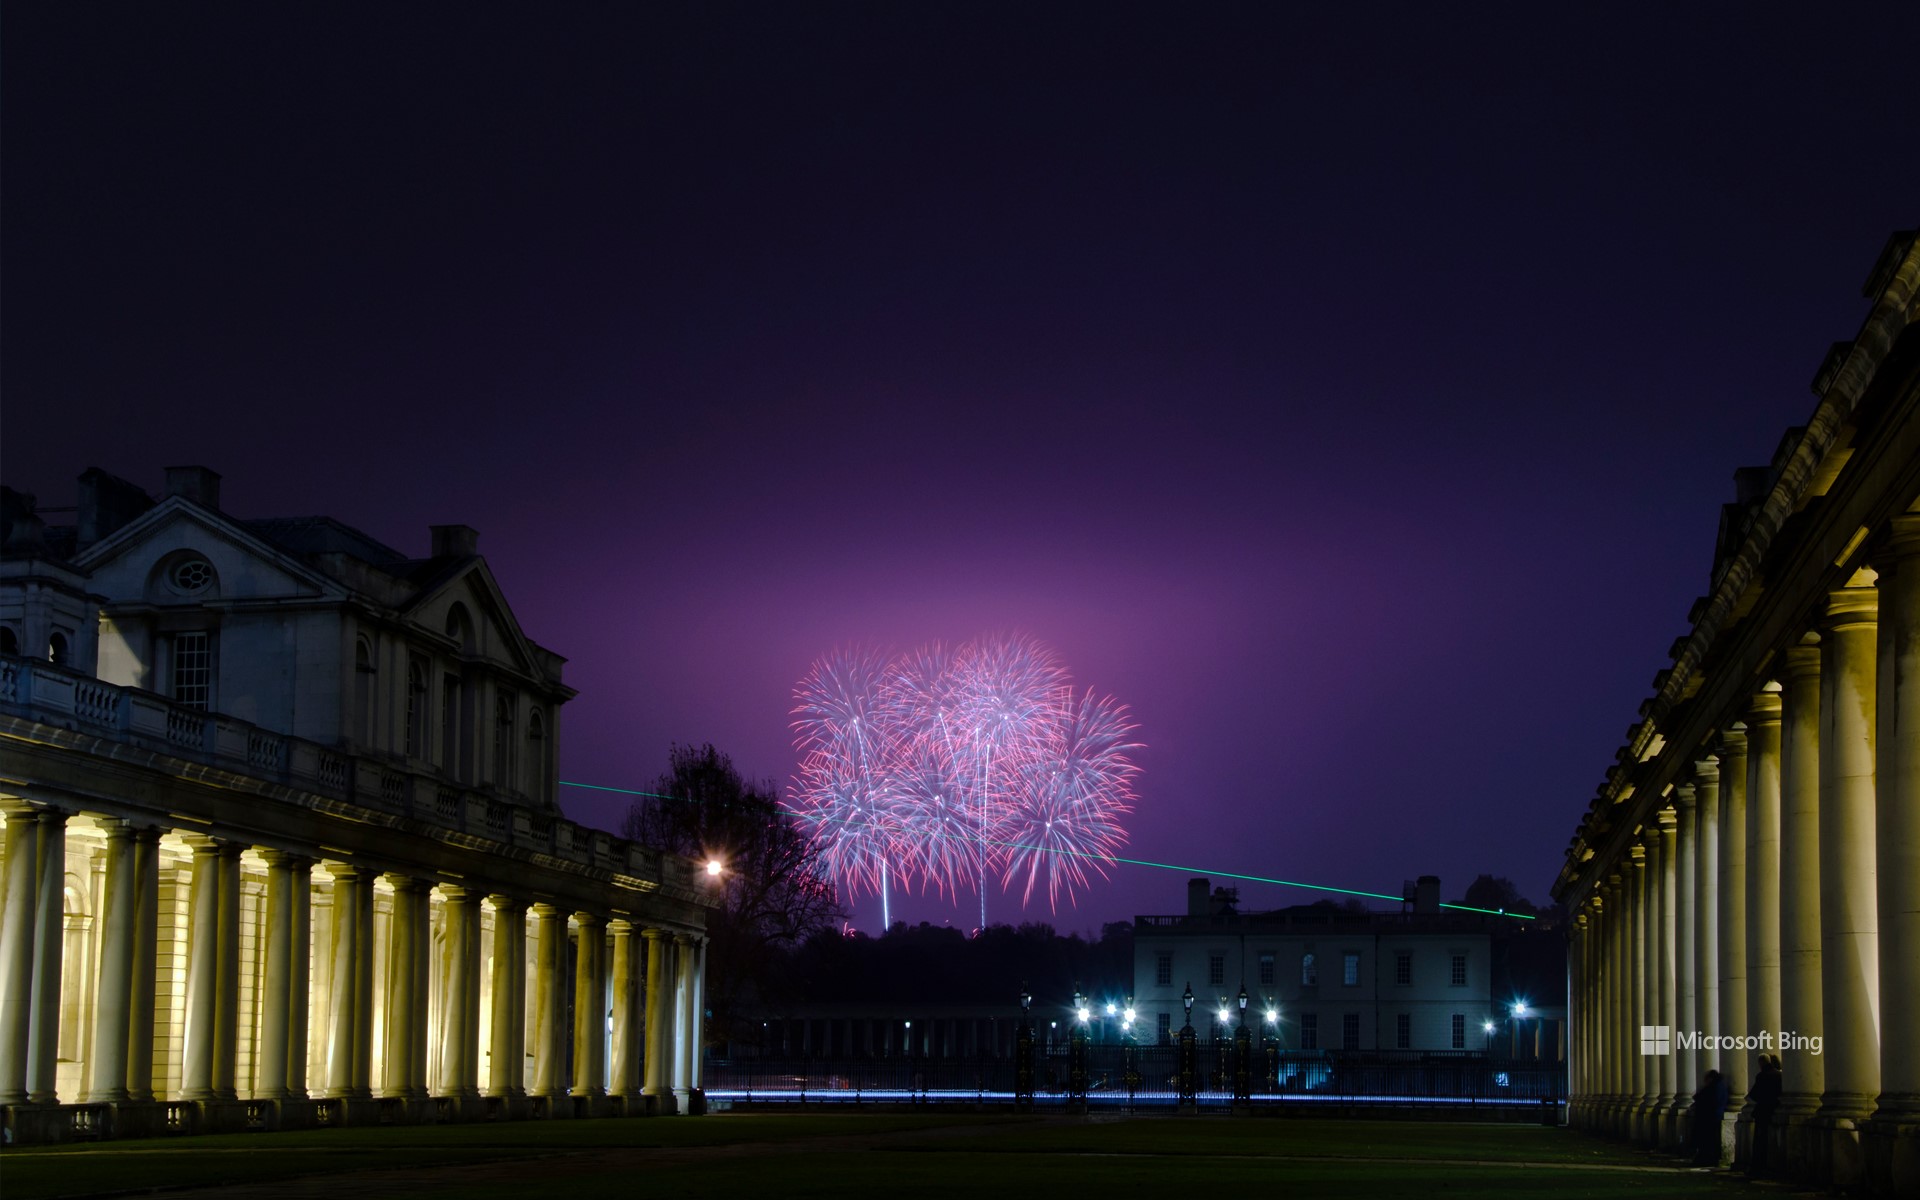 Bonfire Night at the Old Royal Naval College, London